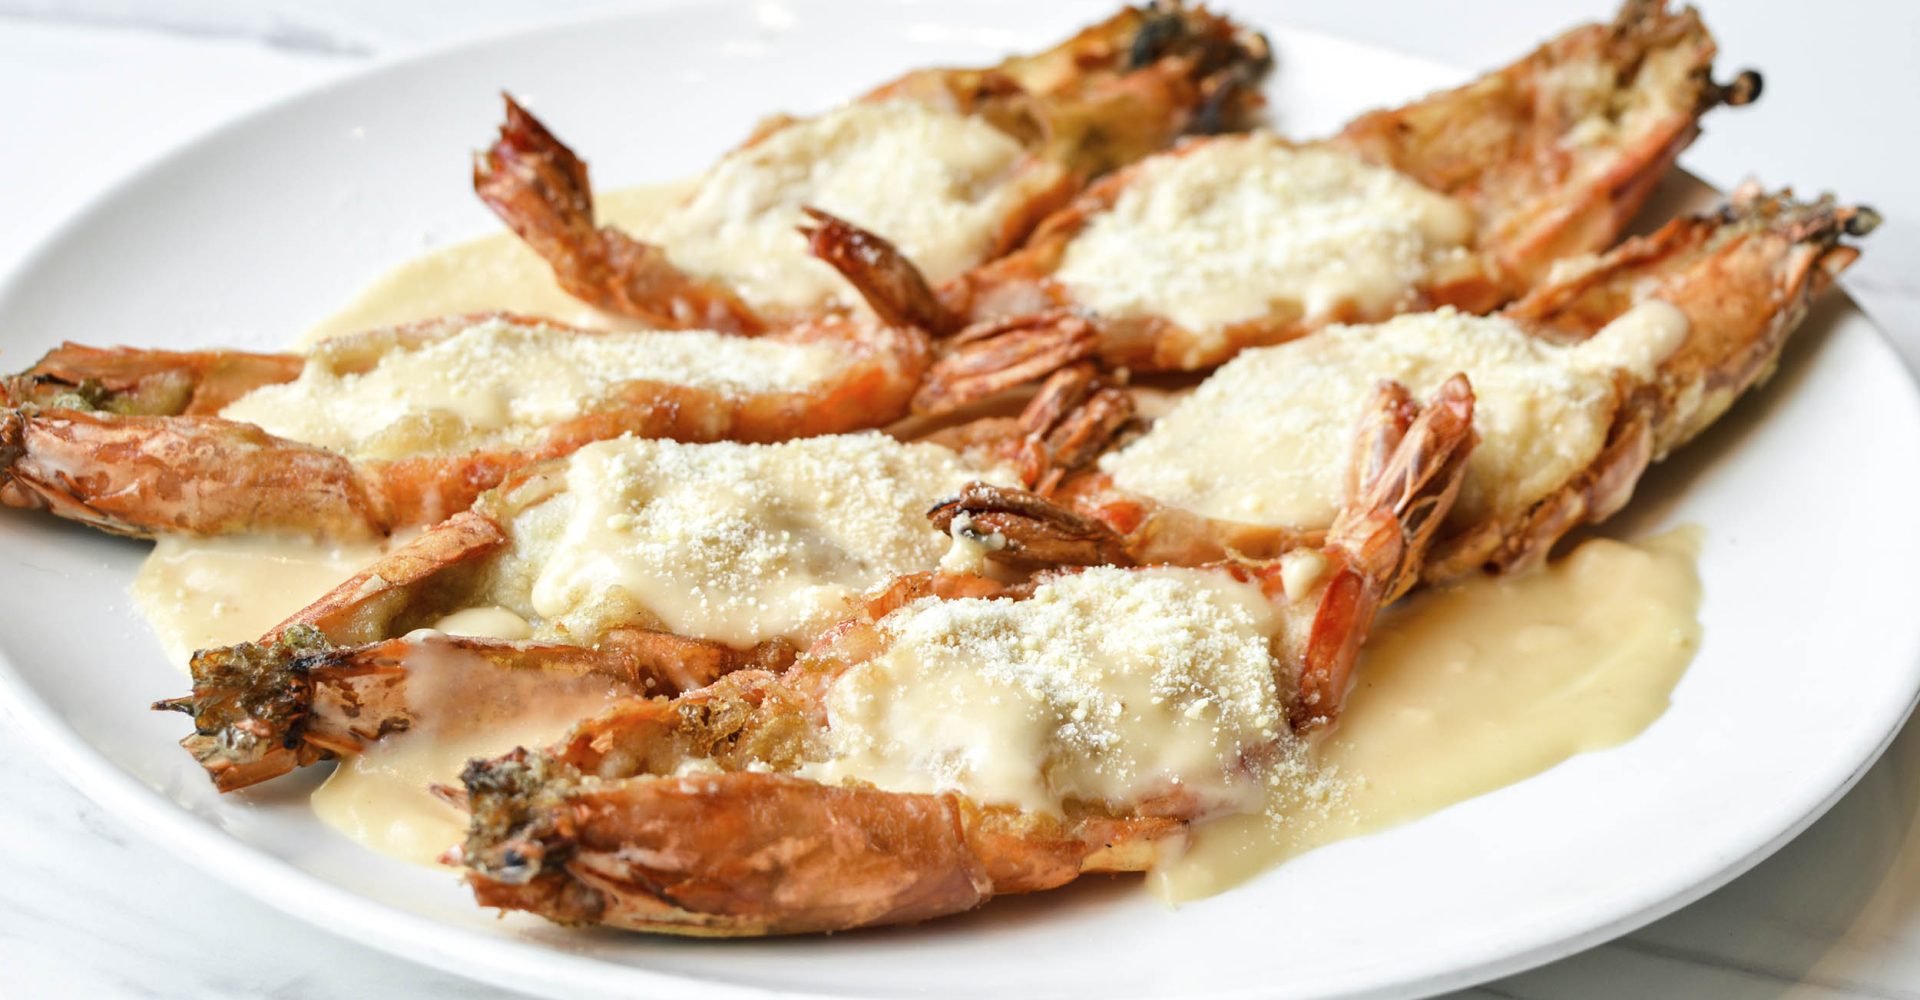 Xiu Seafood Selection - Baked prawns with cheese